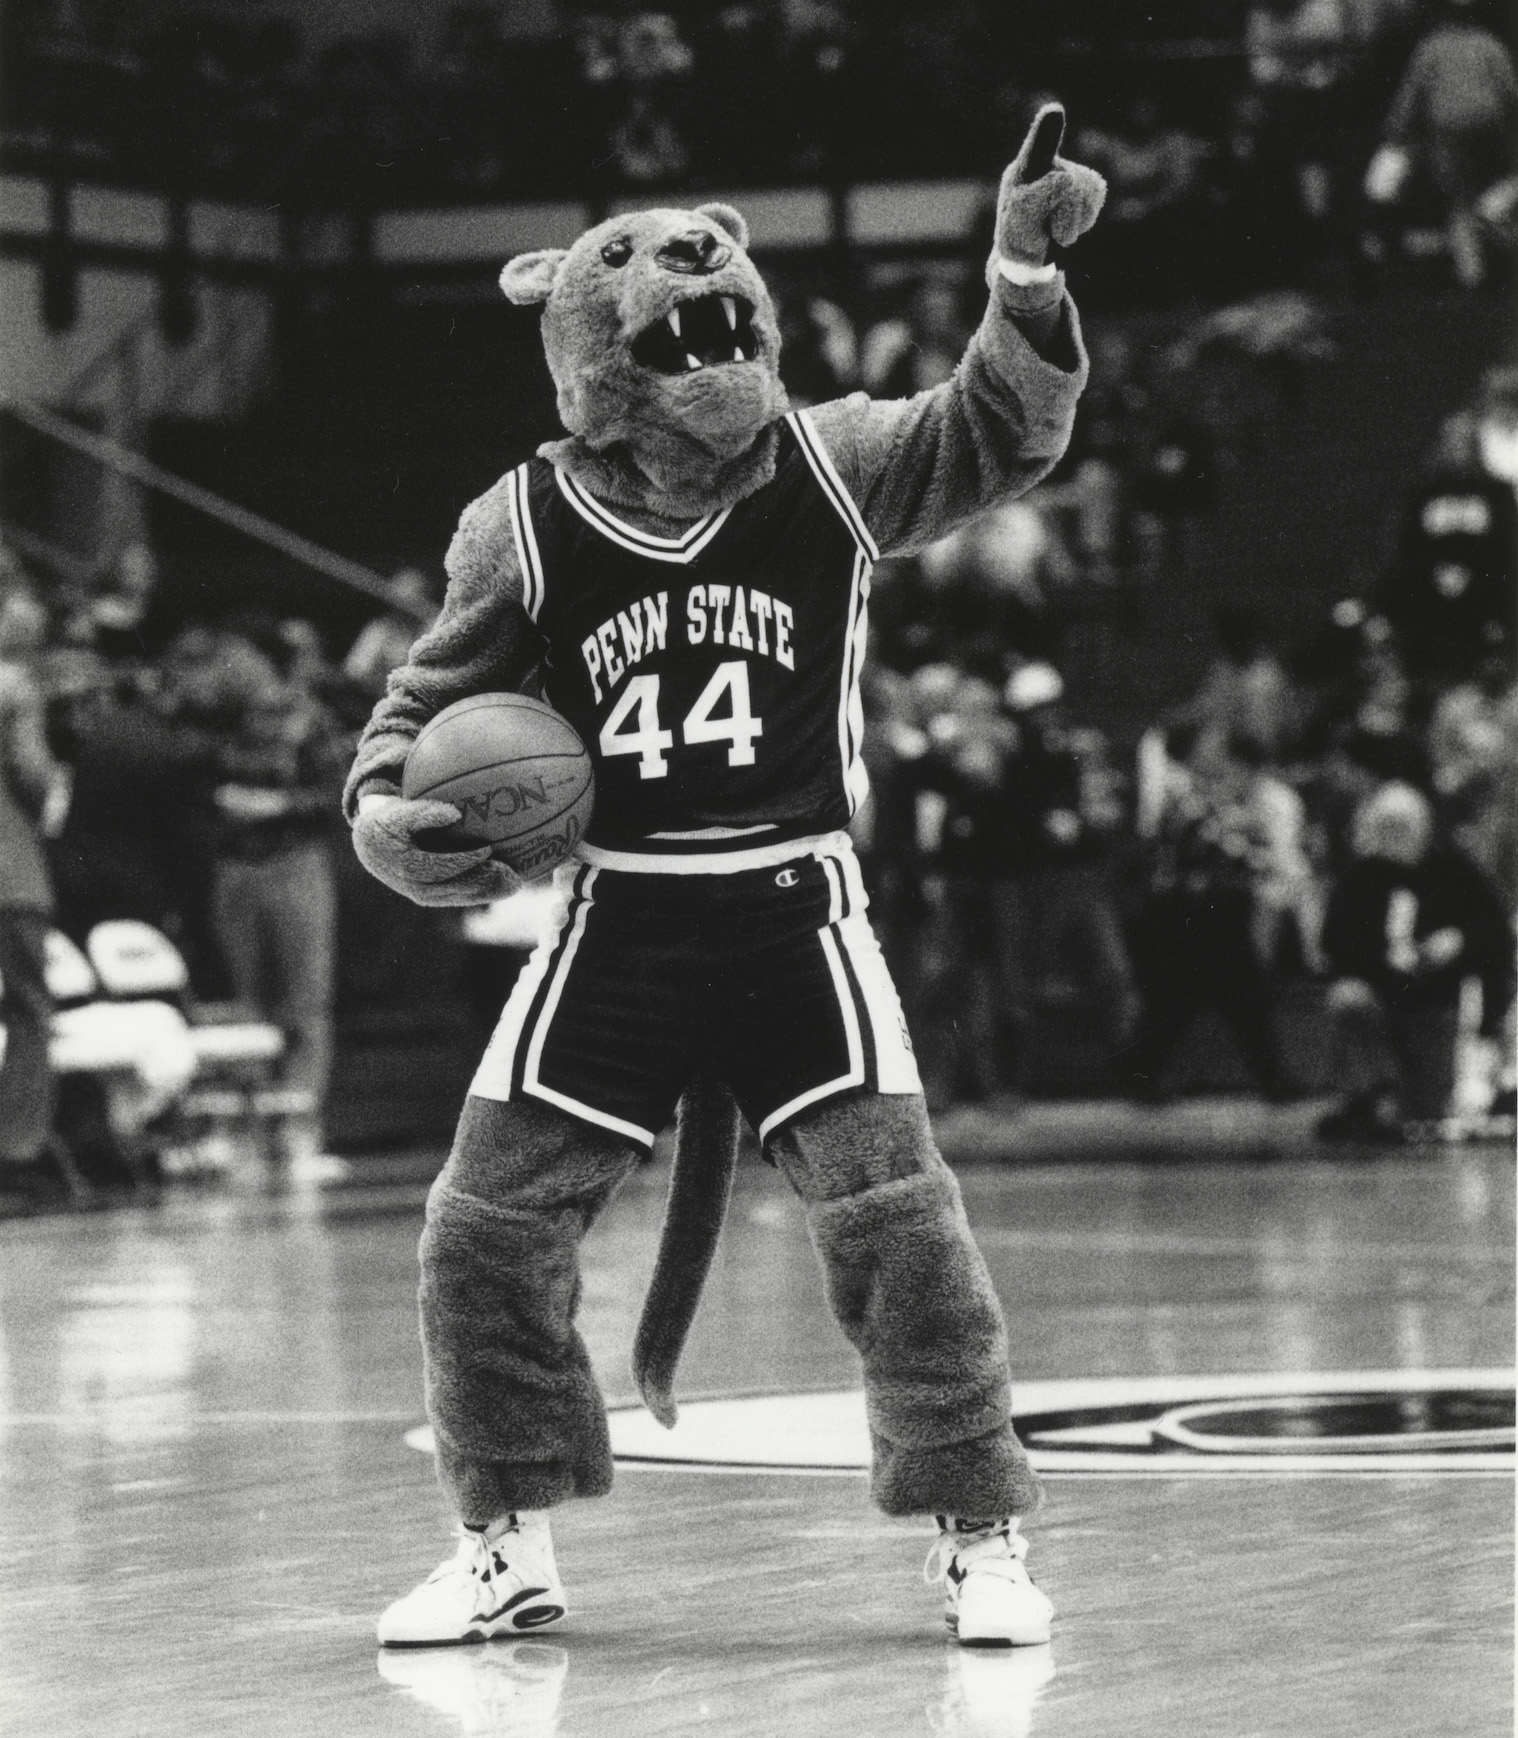 black and white photo of the Nittany Lion on the basketball court